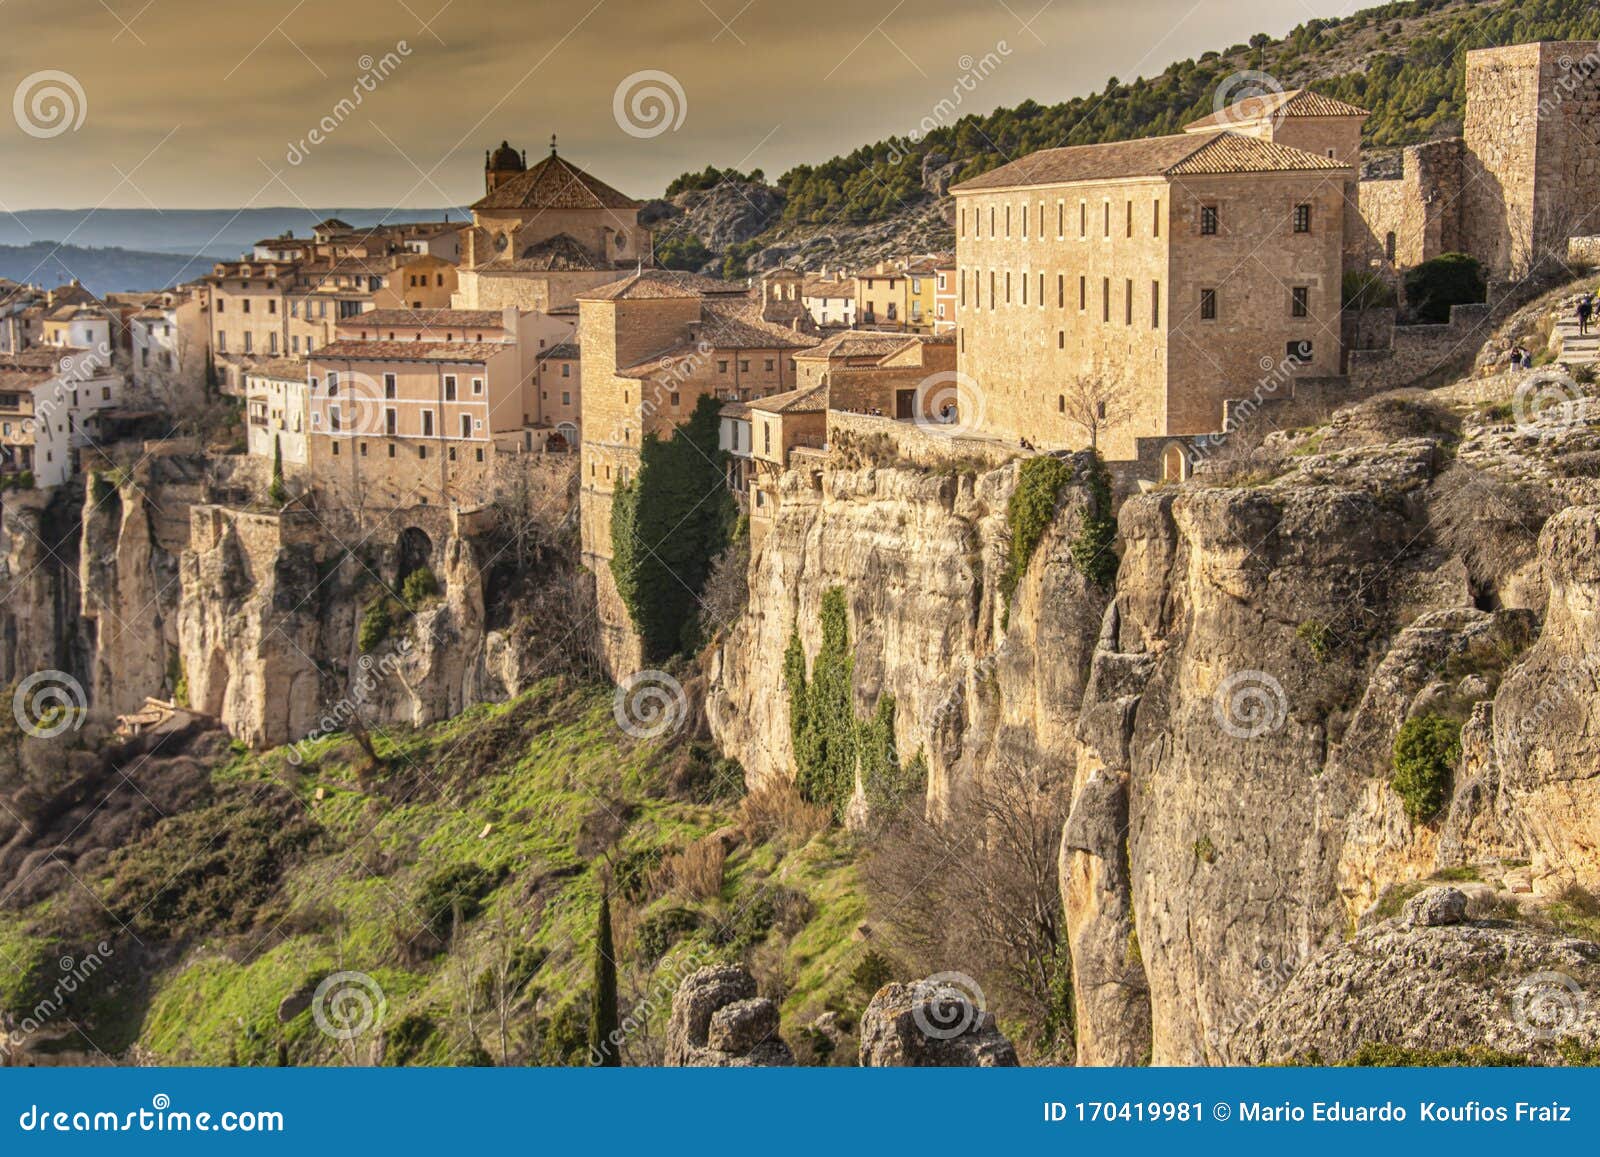 historic city of cuenca perched on the cliffs of the huecar river gorge. spain